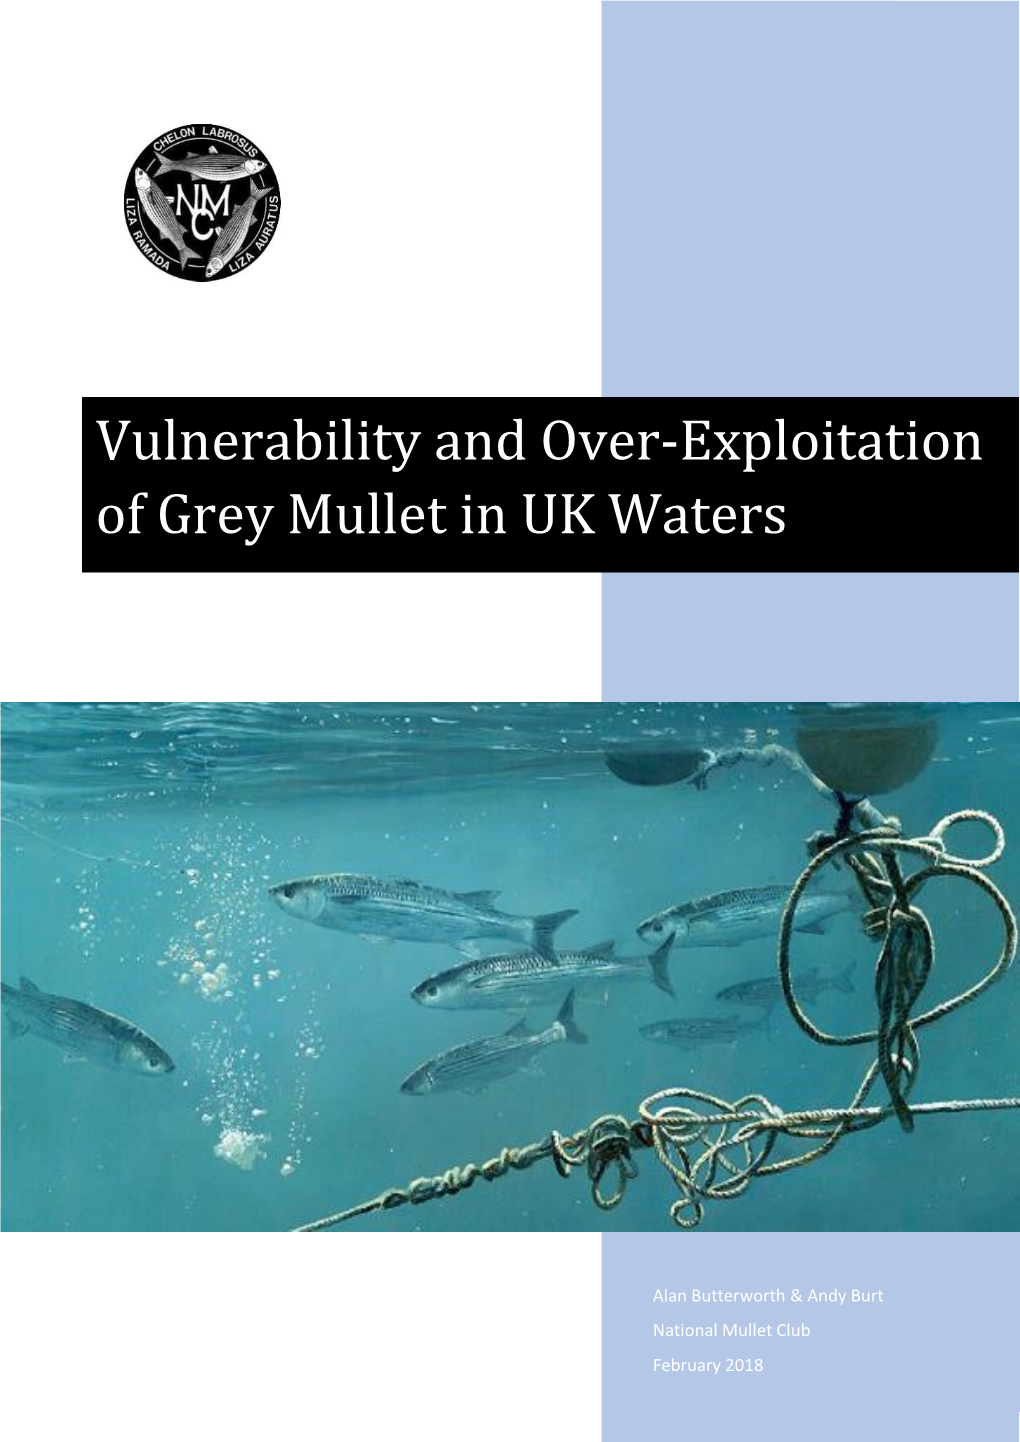 Vulnerability and Over-Exploitation of Grey Mullet in UK Waters